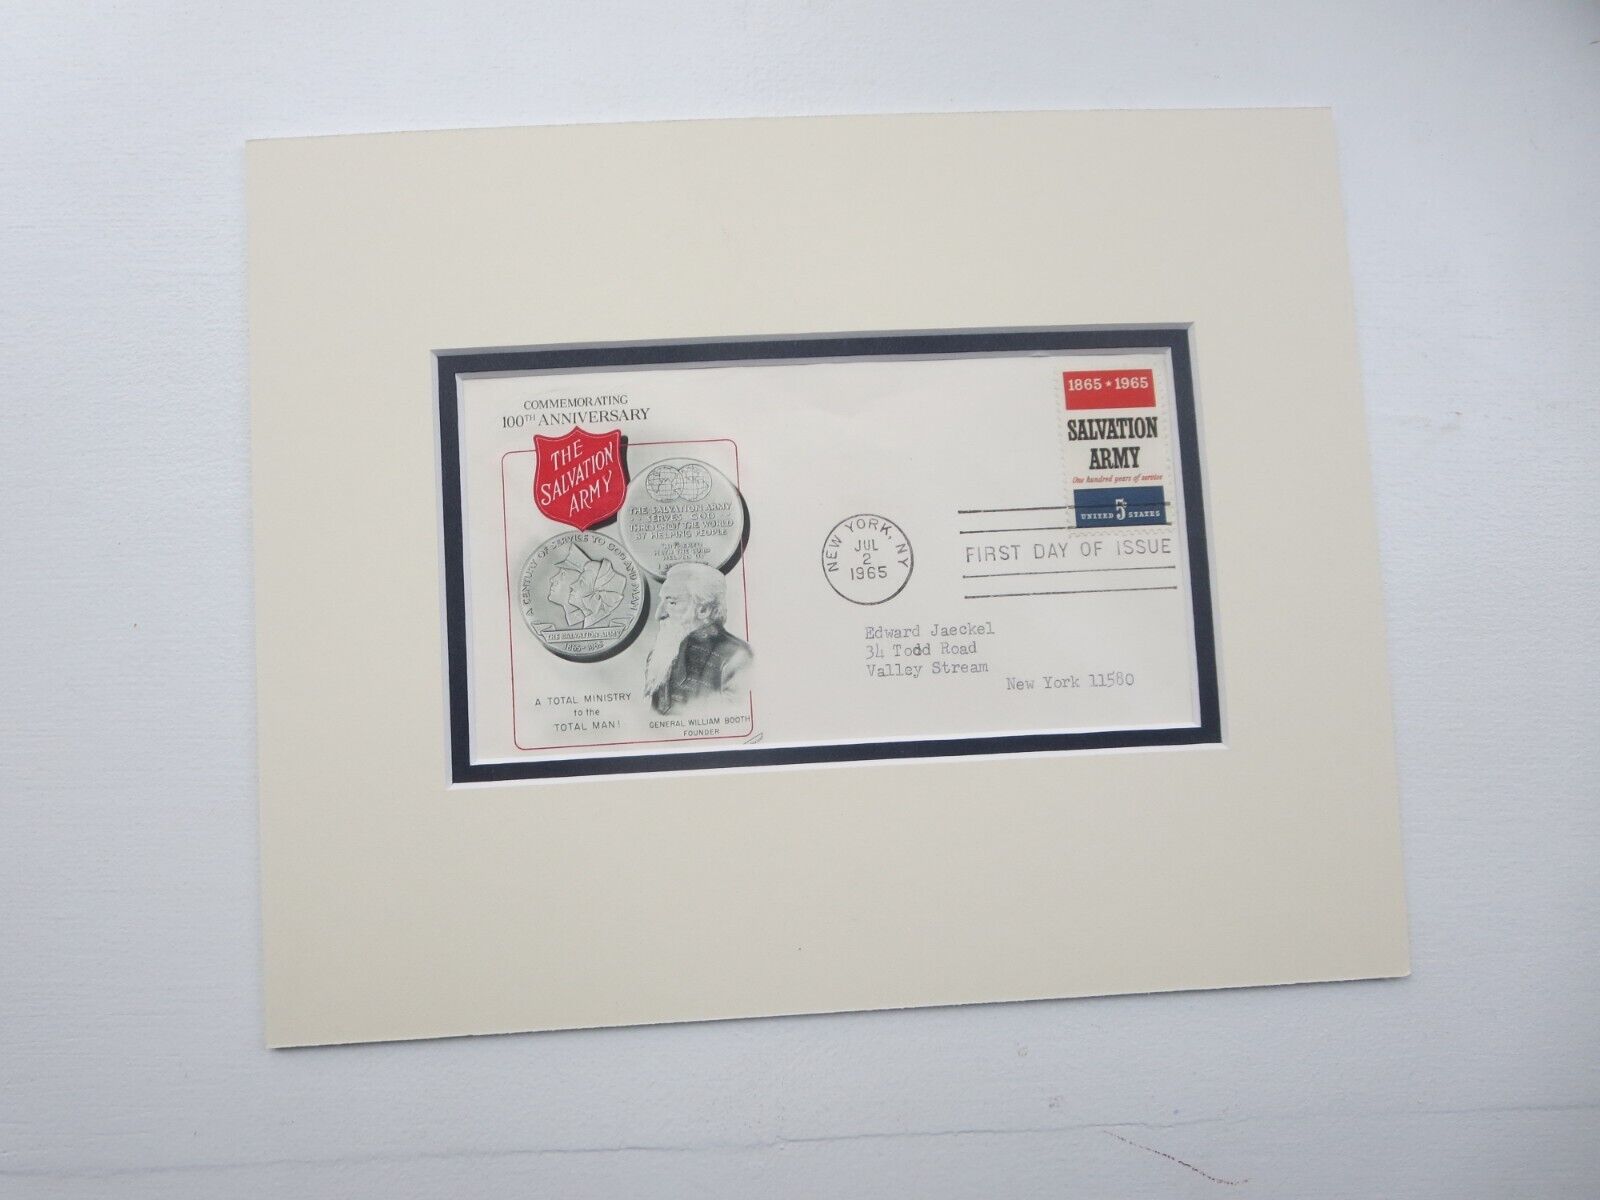 Honoring The Salvation Army And The First Day Cover Of Its Own Stamp